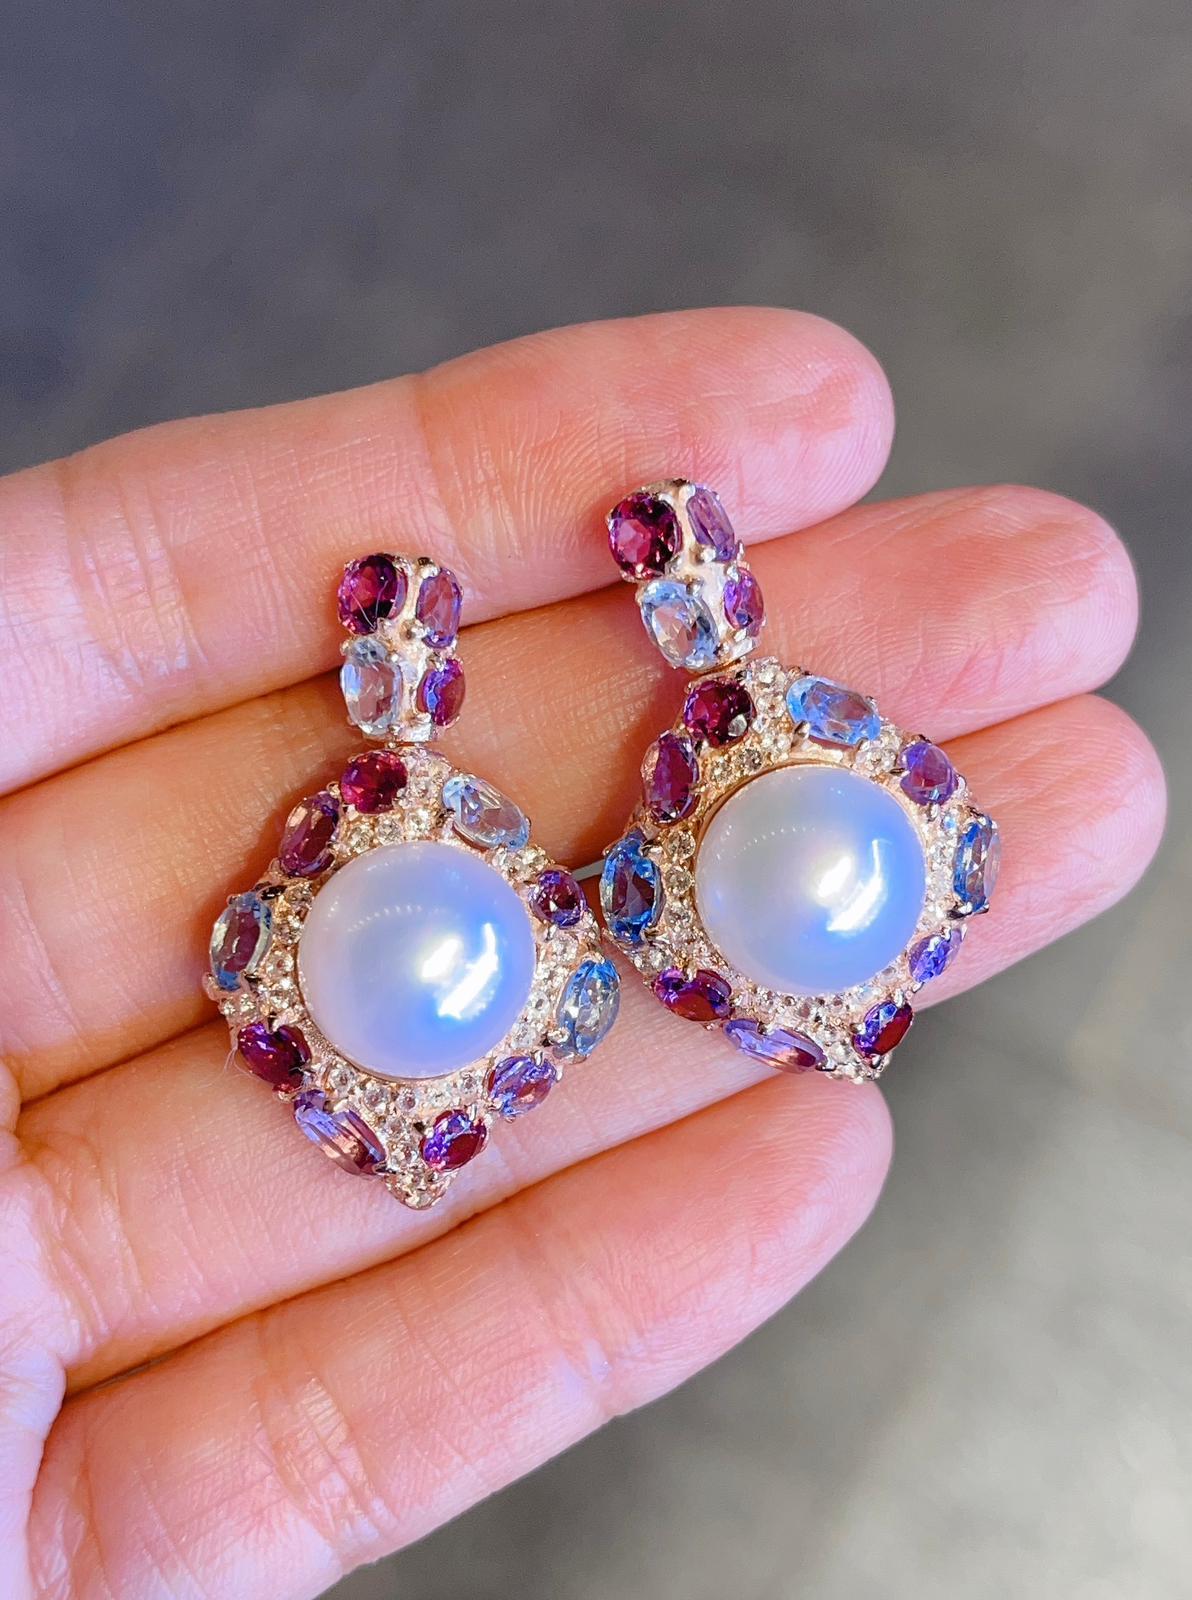 Bochic “Capri” Multi Fancy color Natural Gem Earrings 
Natural Blue Topaz - 4 Carats 
Natural White Topaz - 4 Carats 
Natural Amethyst - 4 Carats 
Natural Rodorite - 4 Carats 
South Sea cultured White Australian Pearls 
Set in 22K Gold and Silver